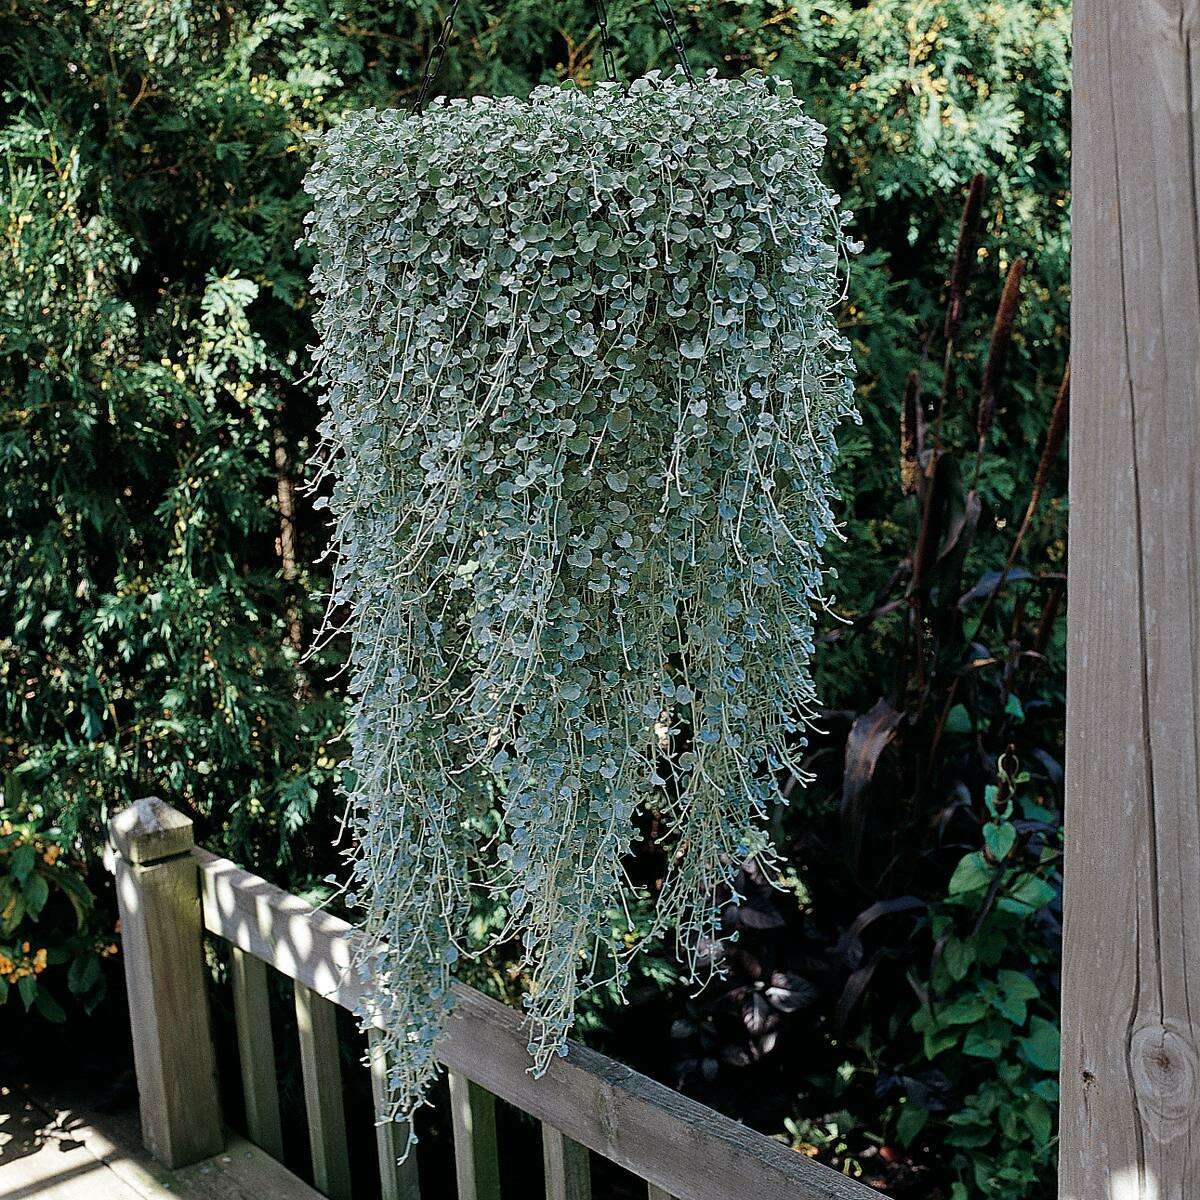 ‘Silver Falls’ dichondra cascades from a hanging basket.